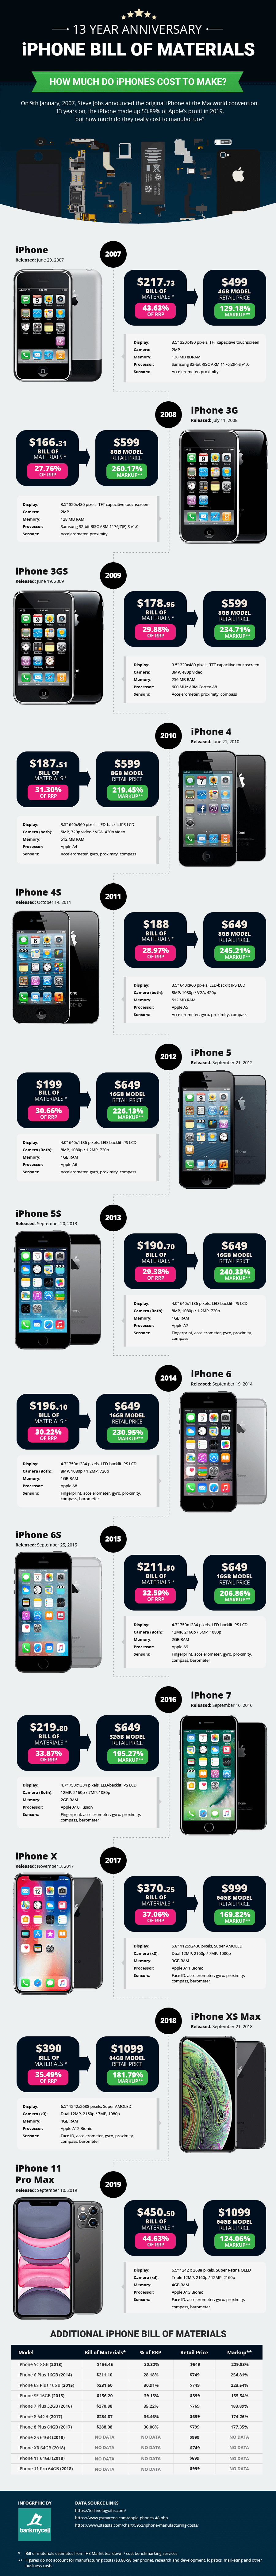 Infographic: How Much Does it Cost to Make an iPhone